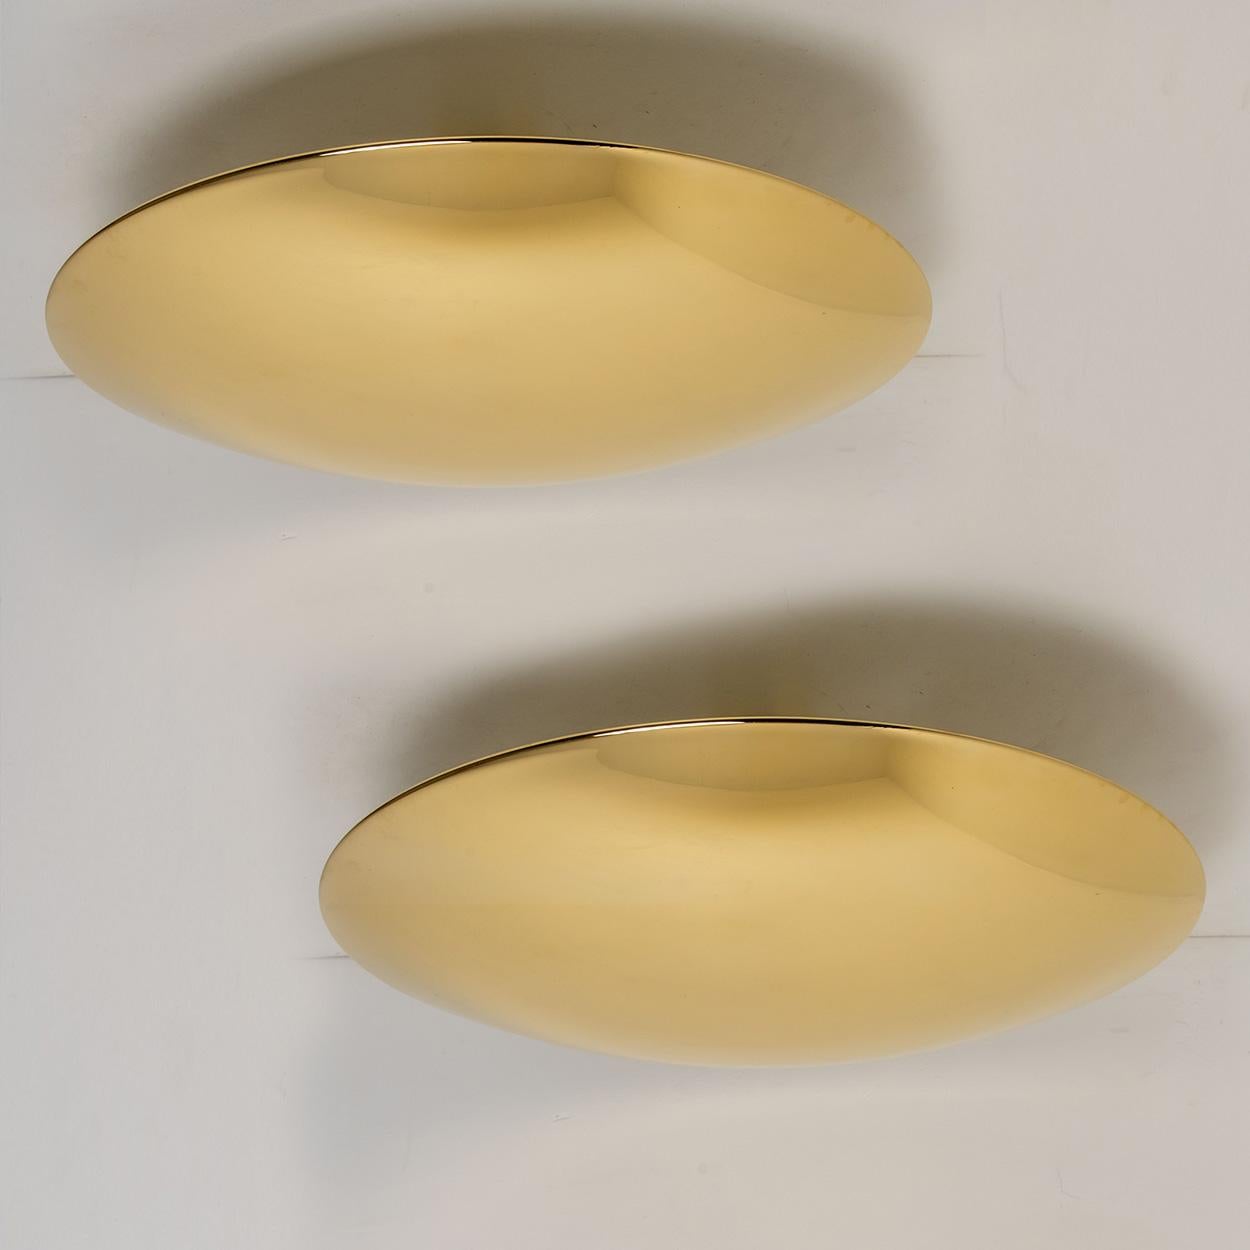 1 of the 2 Large Florian Schulz Brass Flushmount Ceiling /Wall Lights, 1970 For Sale 7